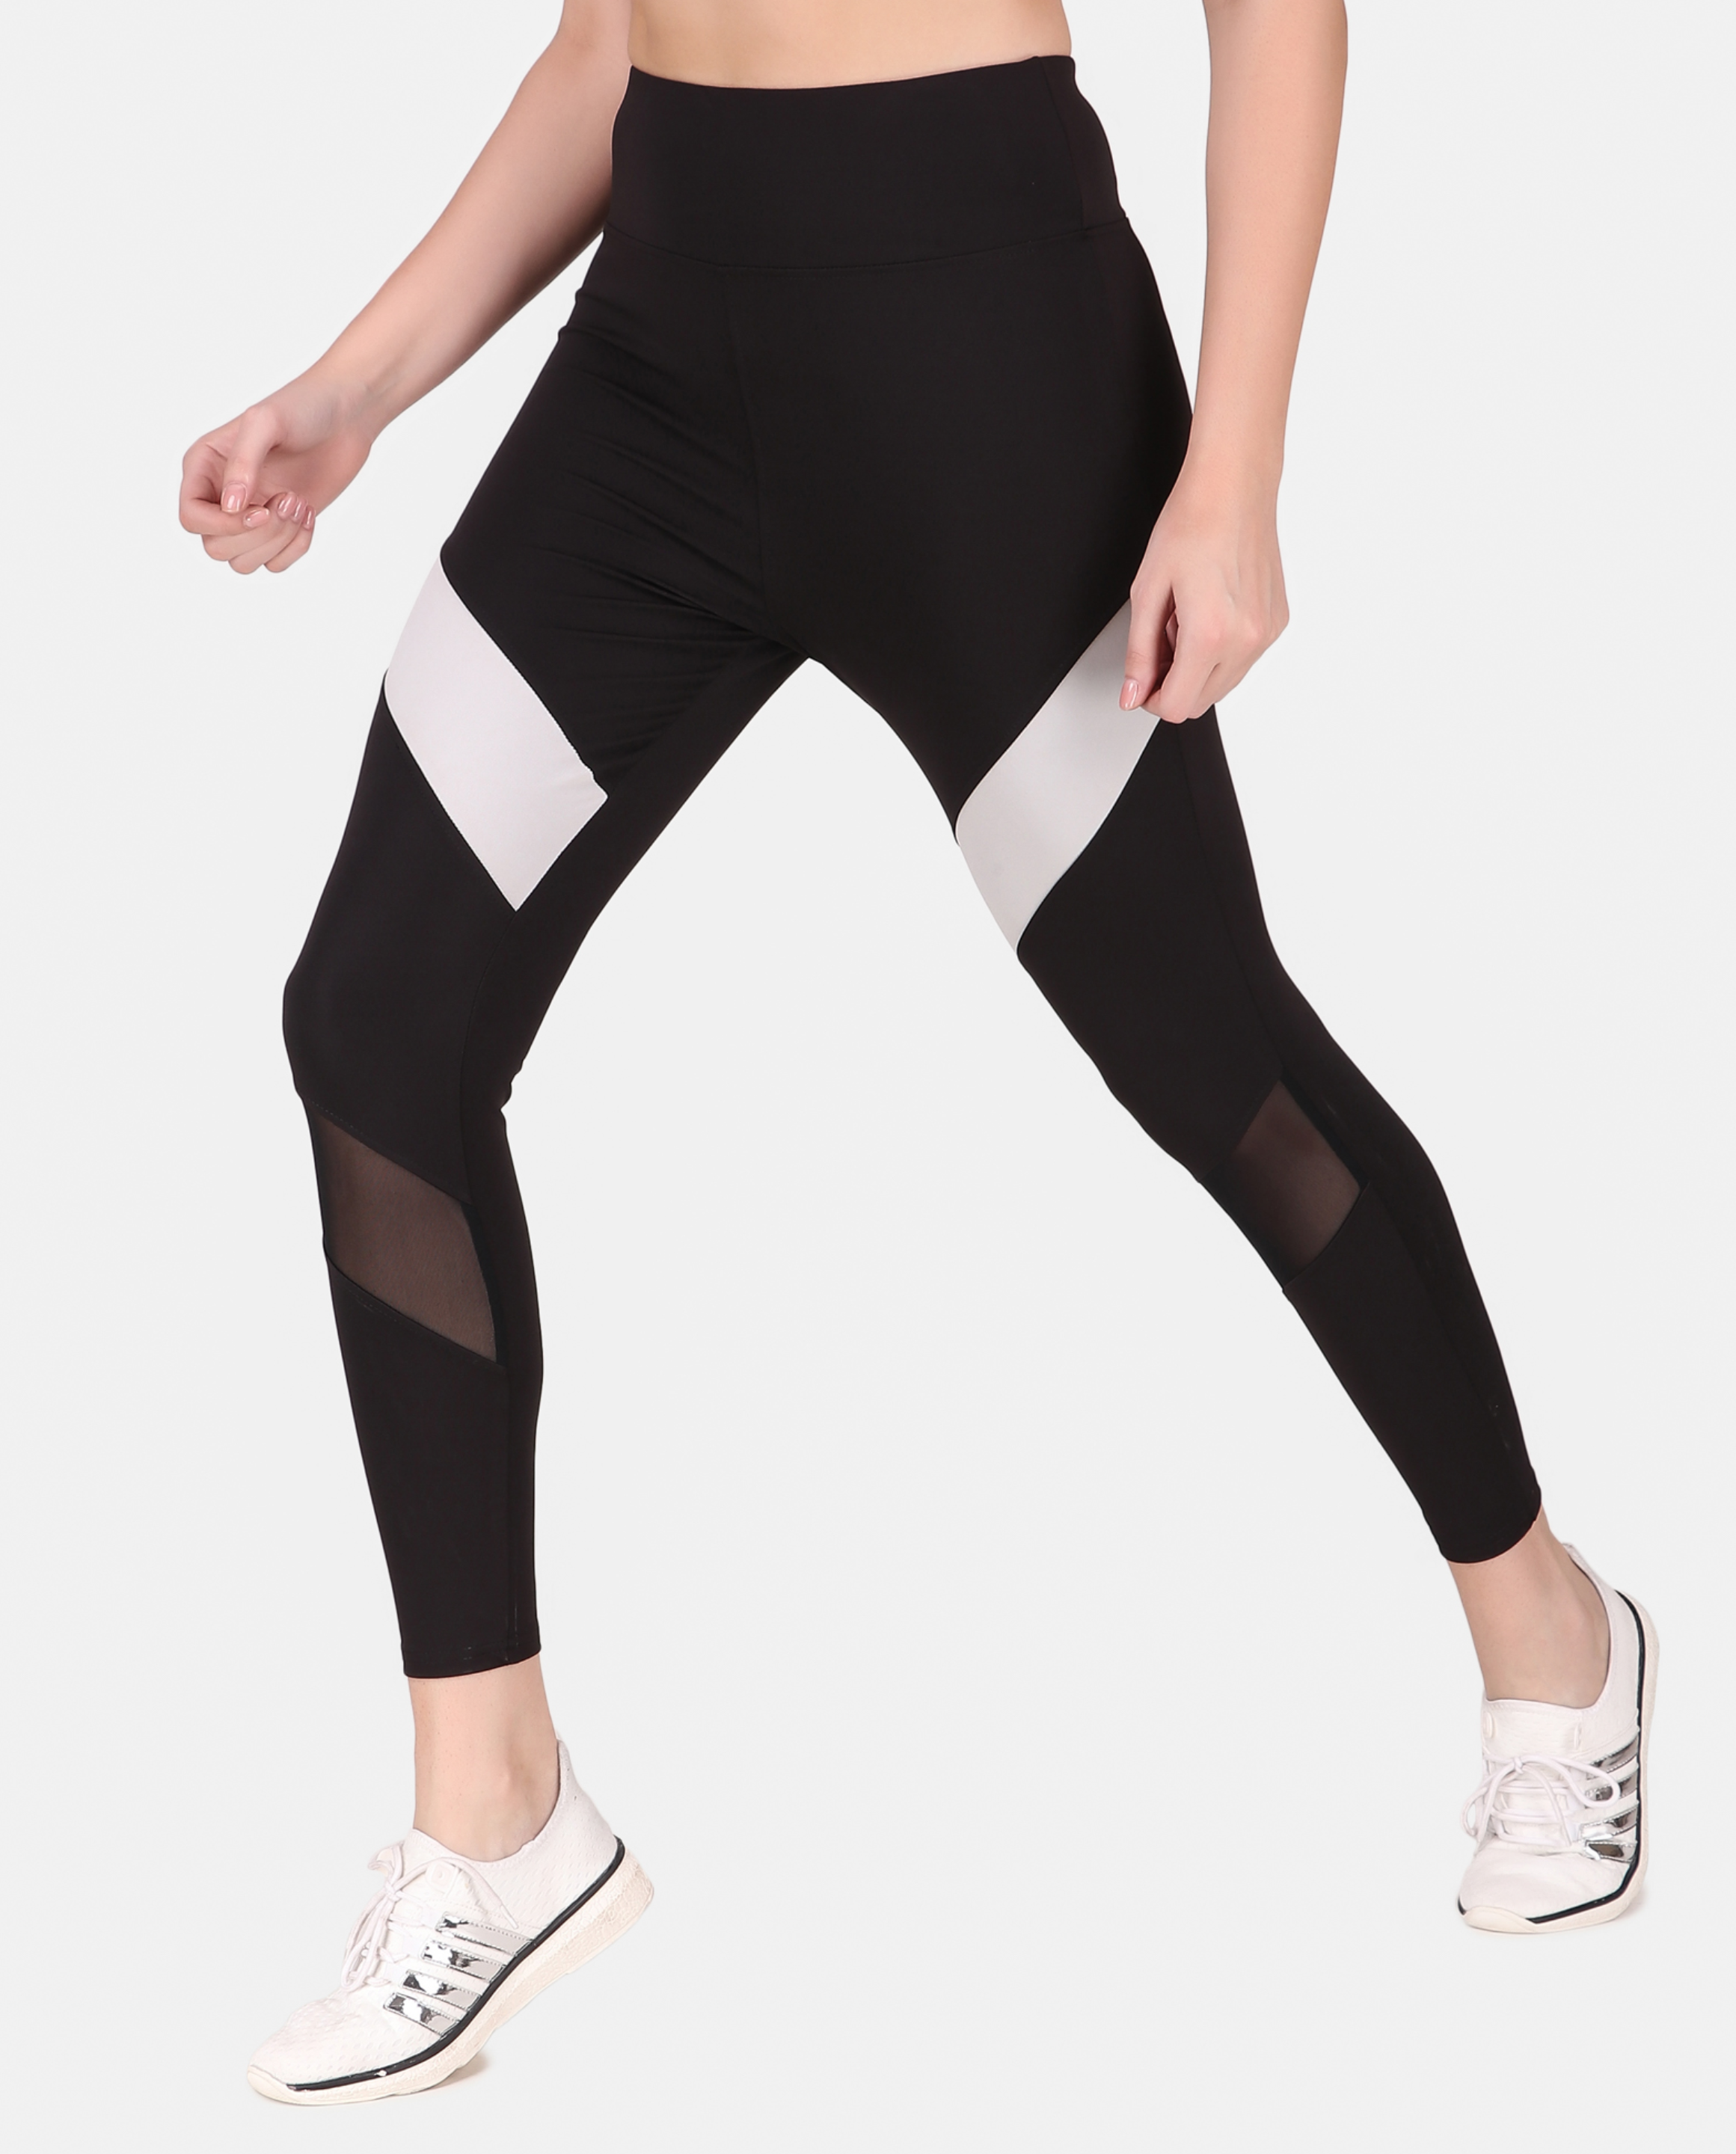 Mid Waist Black Womens Lycra Sports Tights GYM, Skin Fit at Rs 175 in Jaipur